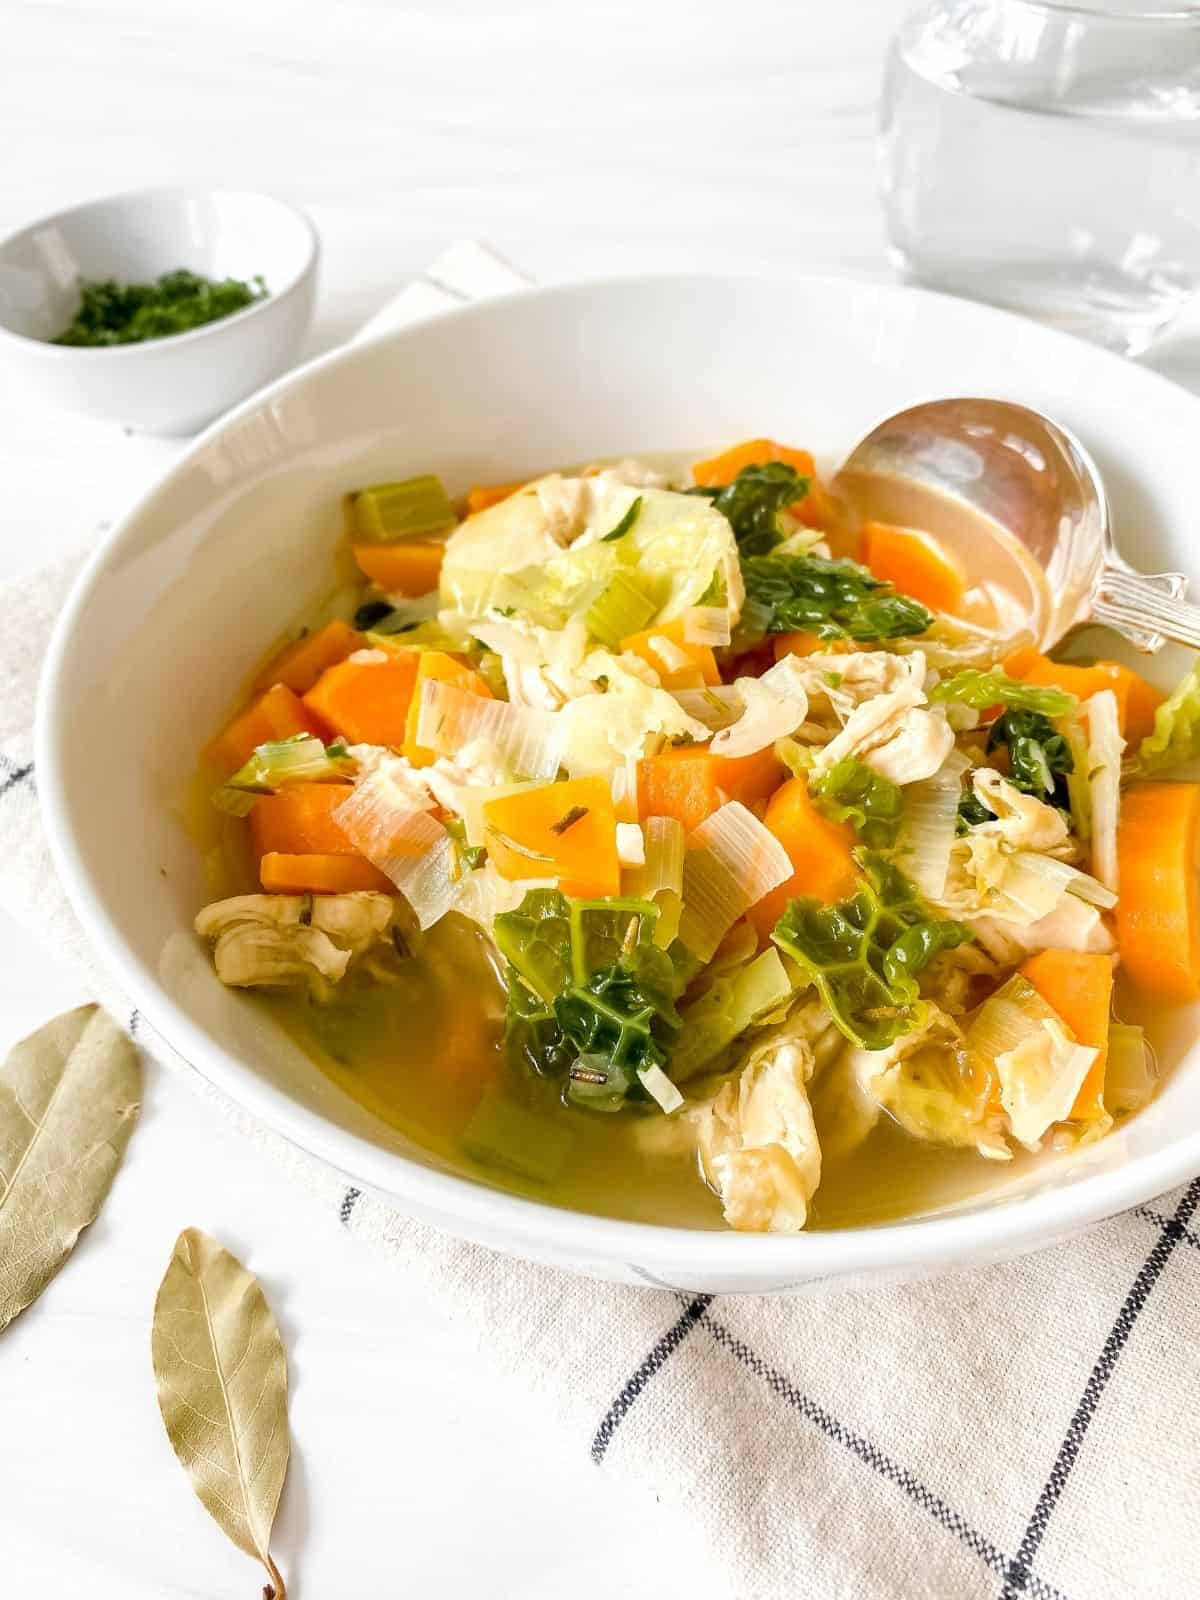 chicken and cabbage soup in a white bowl with a glass of water and bowl of herbs in the background.